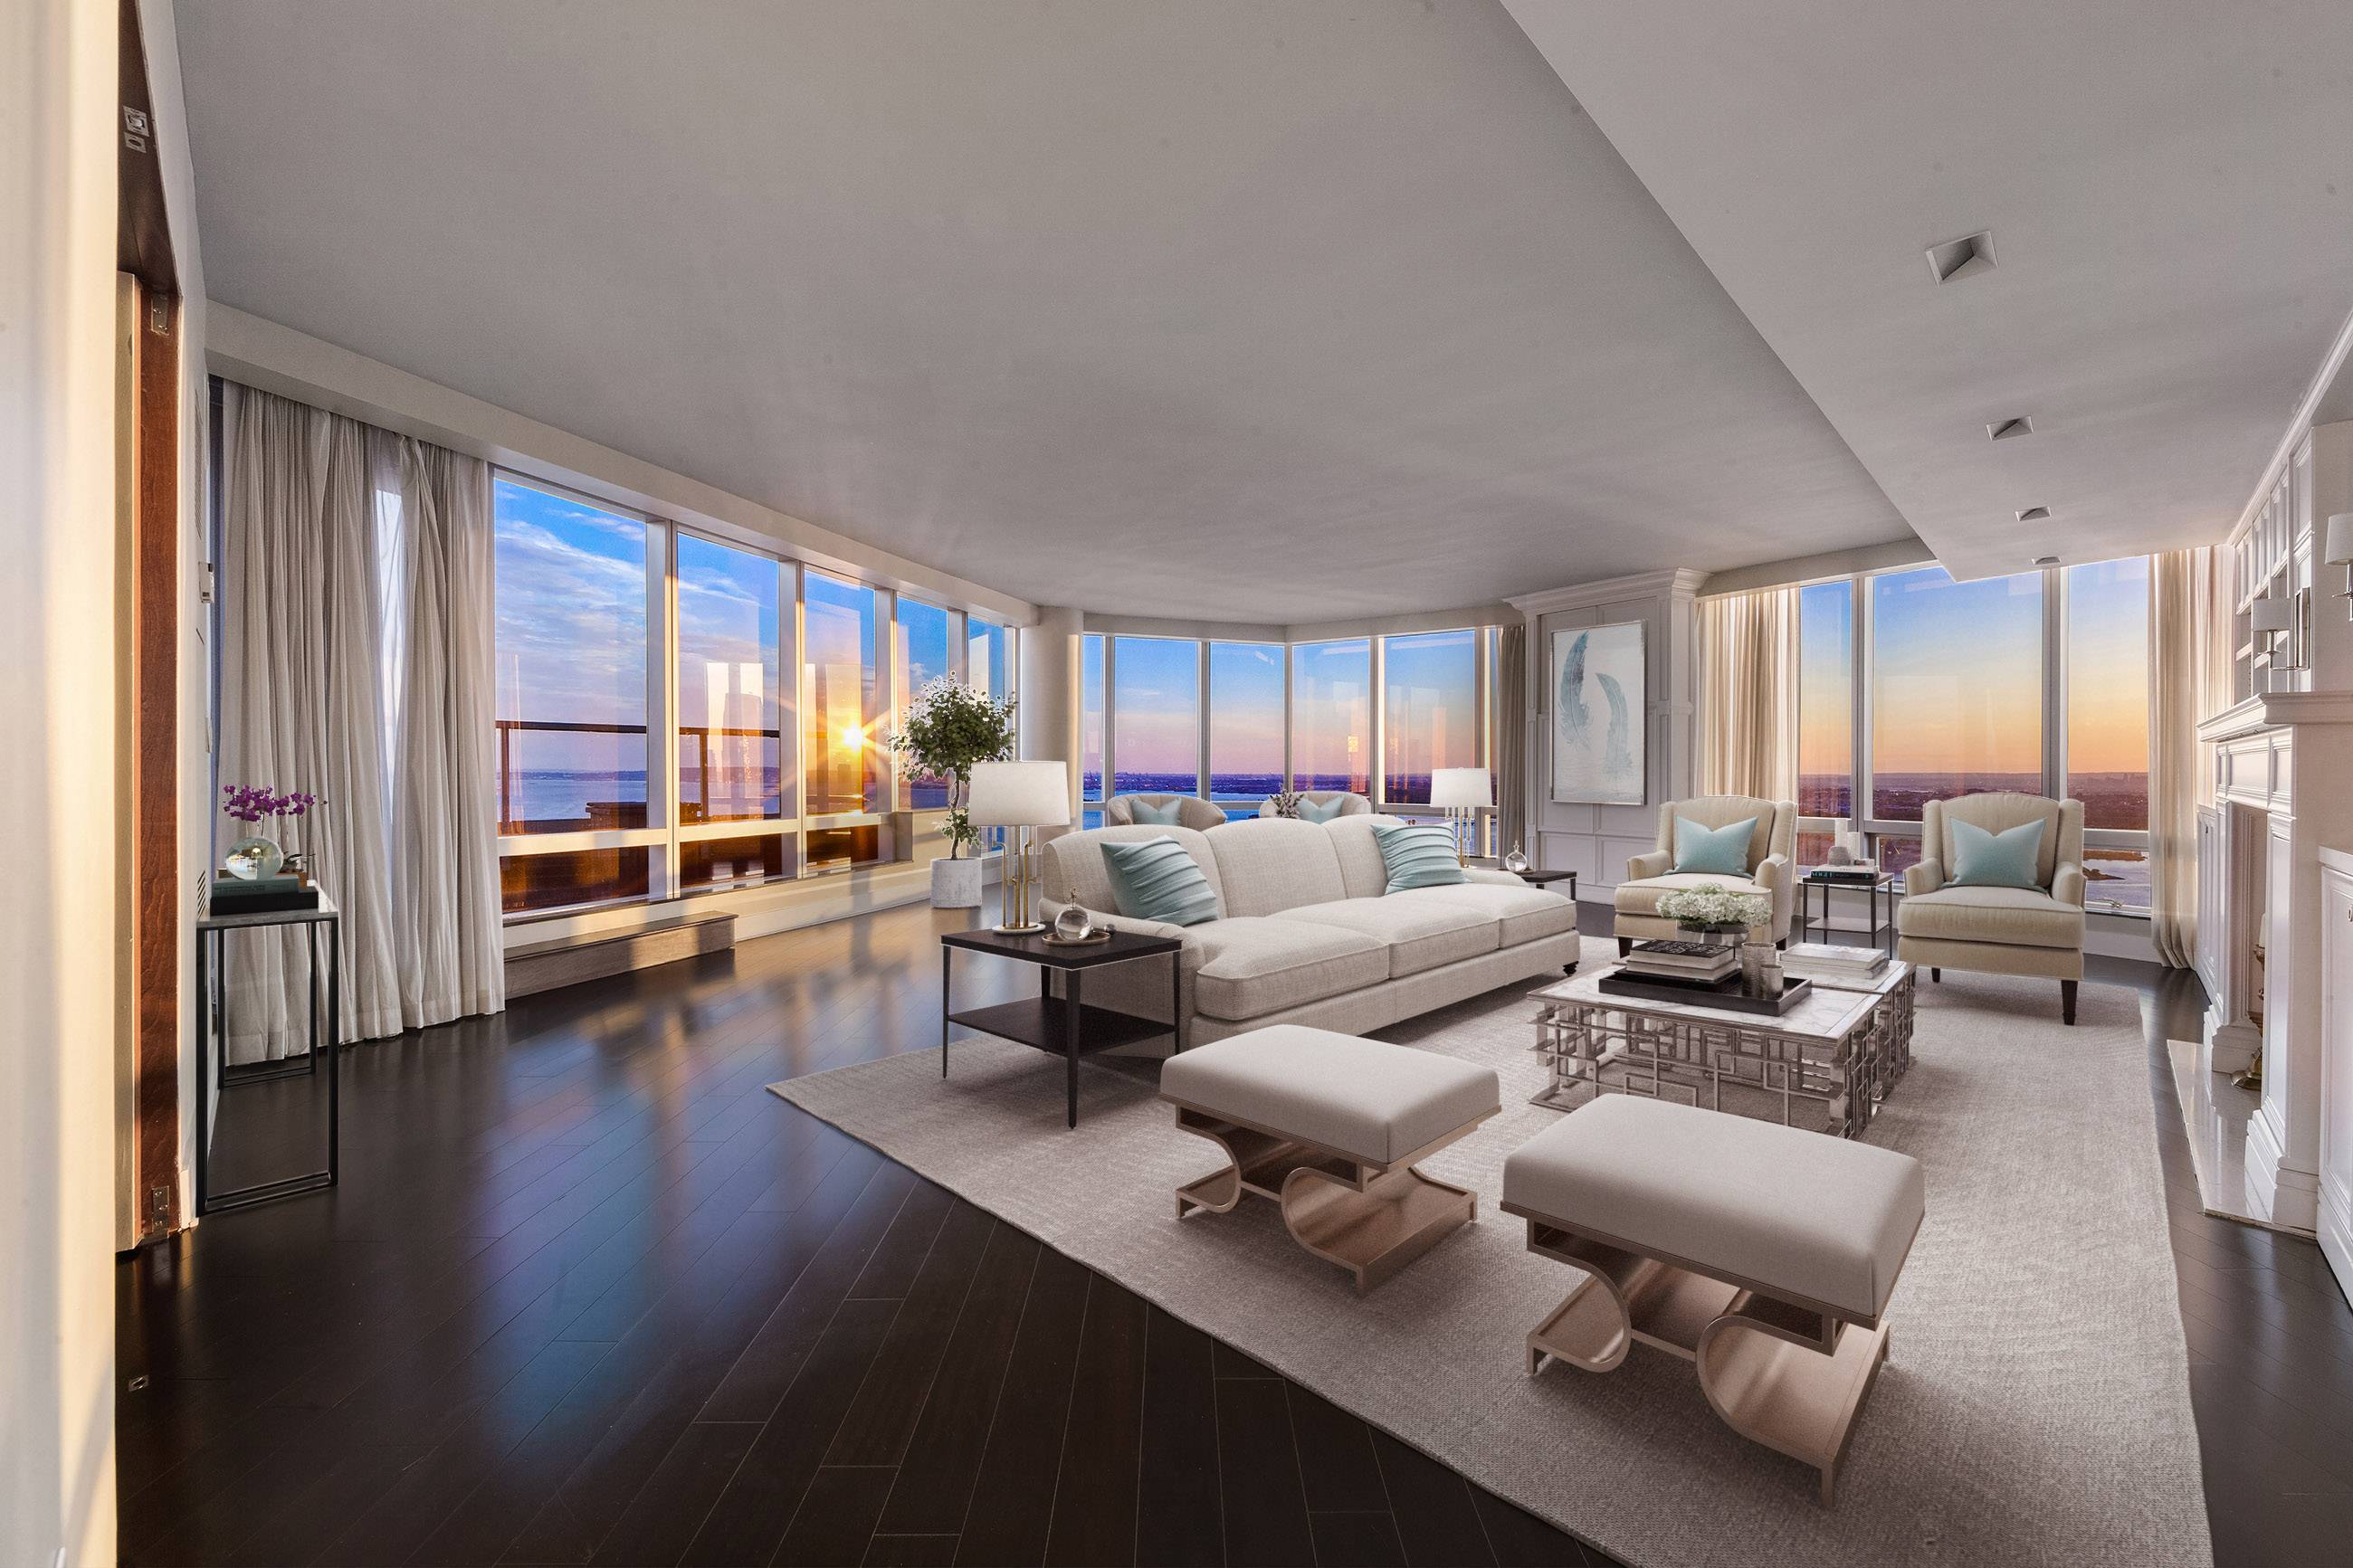 Your Dream Penthouse! Duplex 4+ Bed with 42 Foot Private Terrace and Unbelievable Harbor Views!